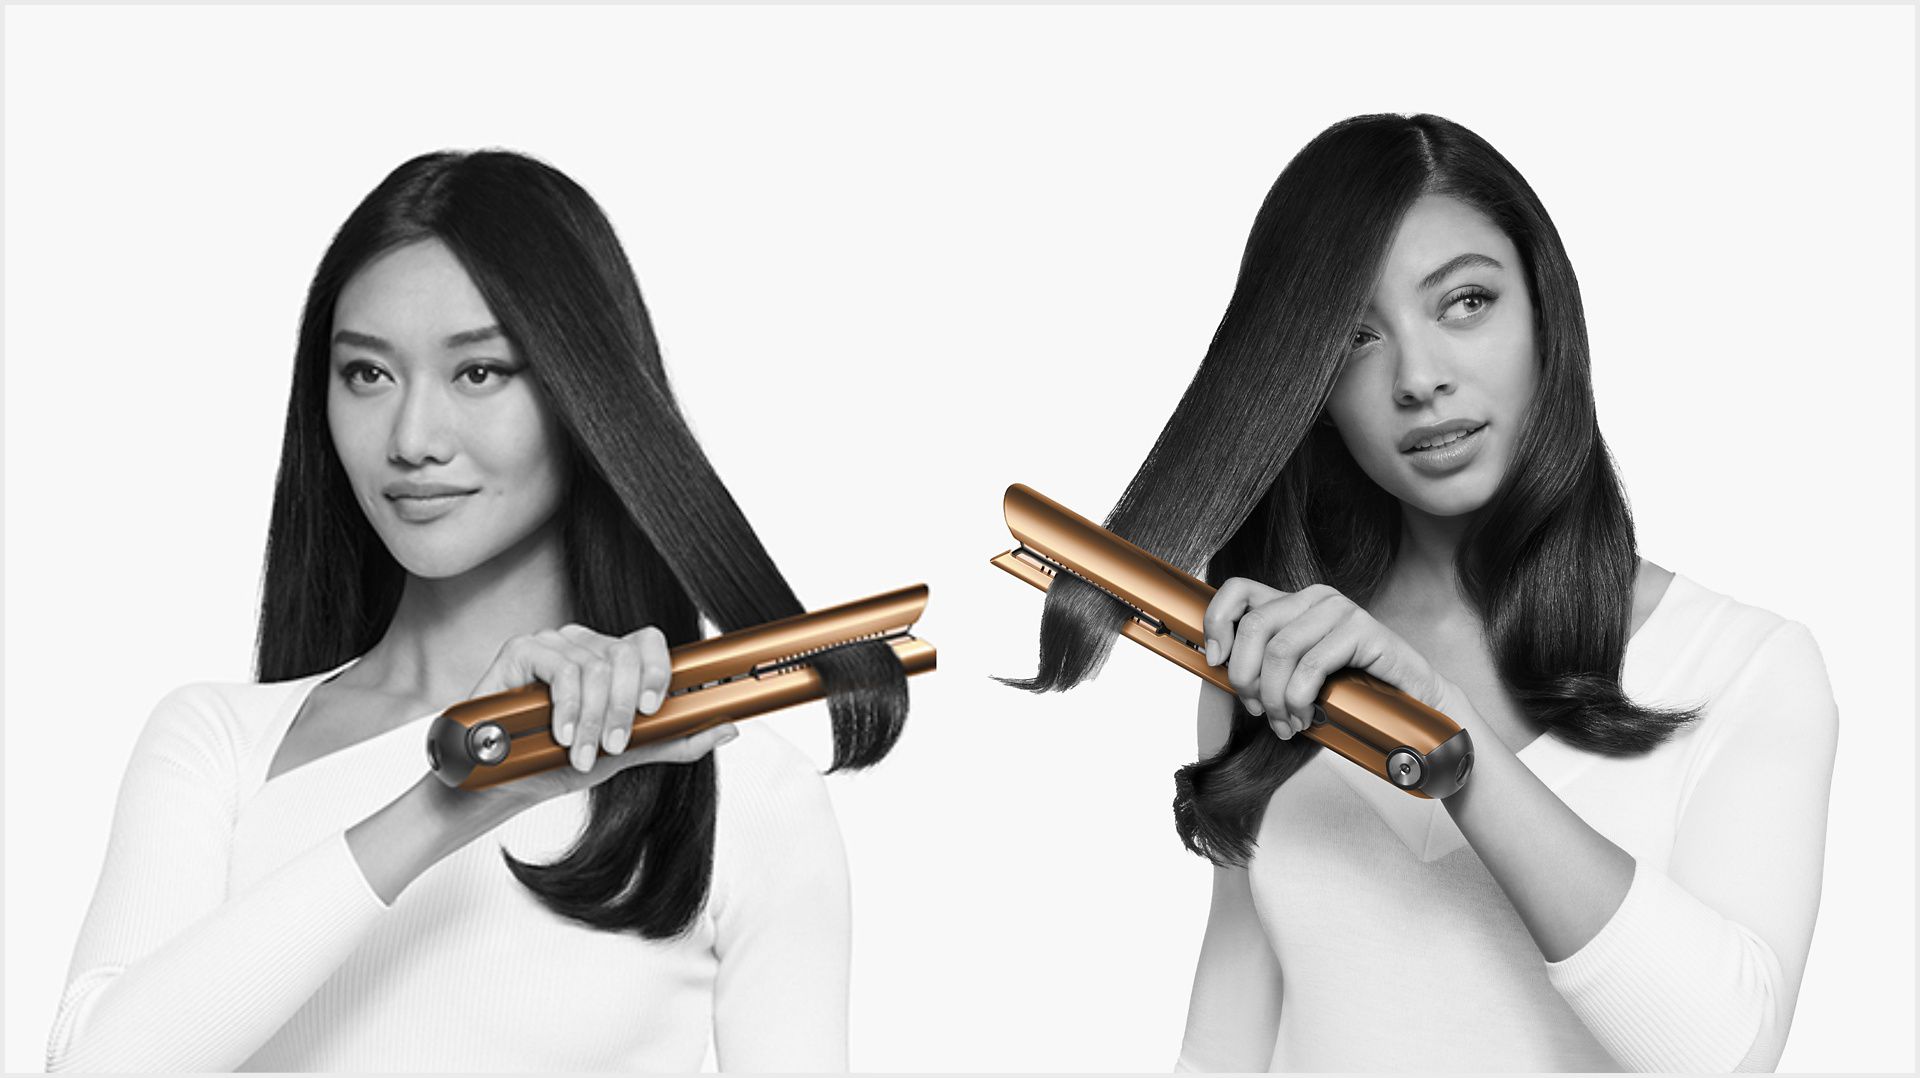 Two models using the Dyson Corrale straightener.